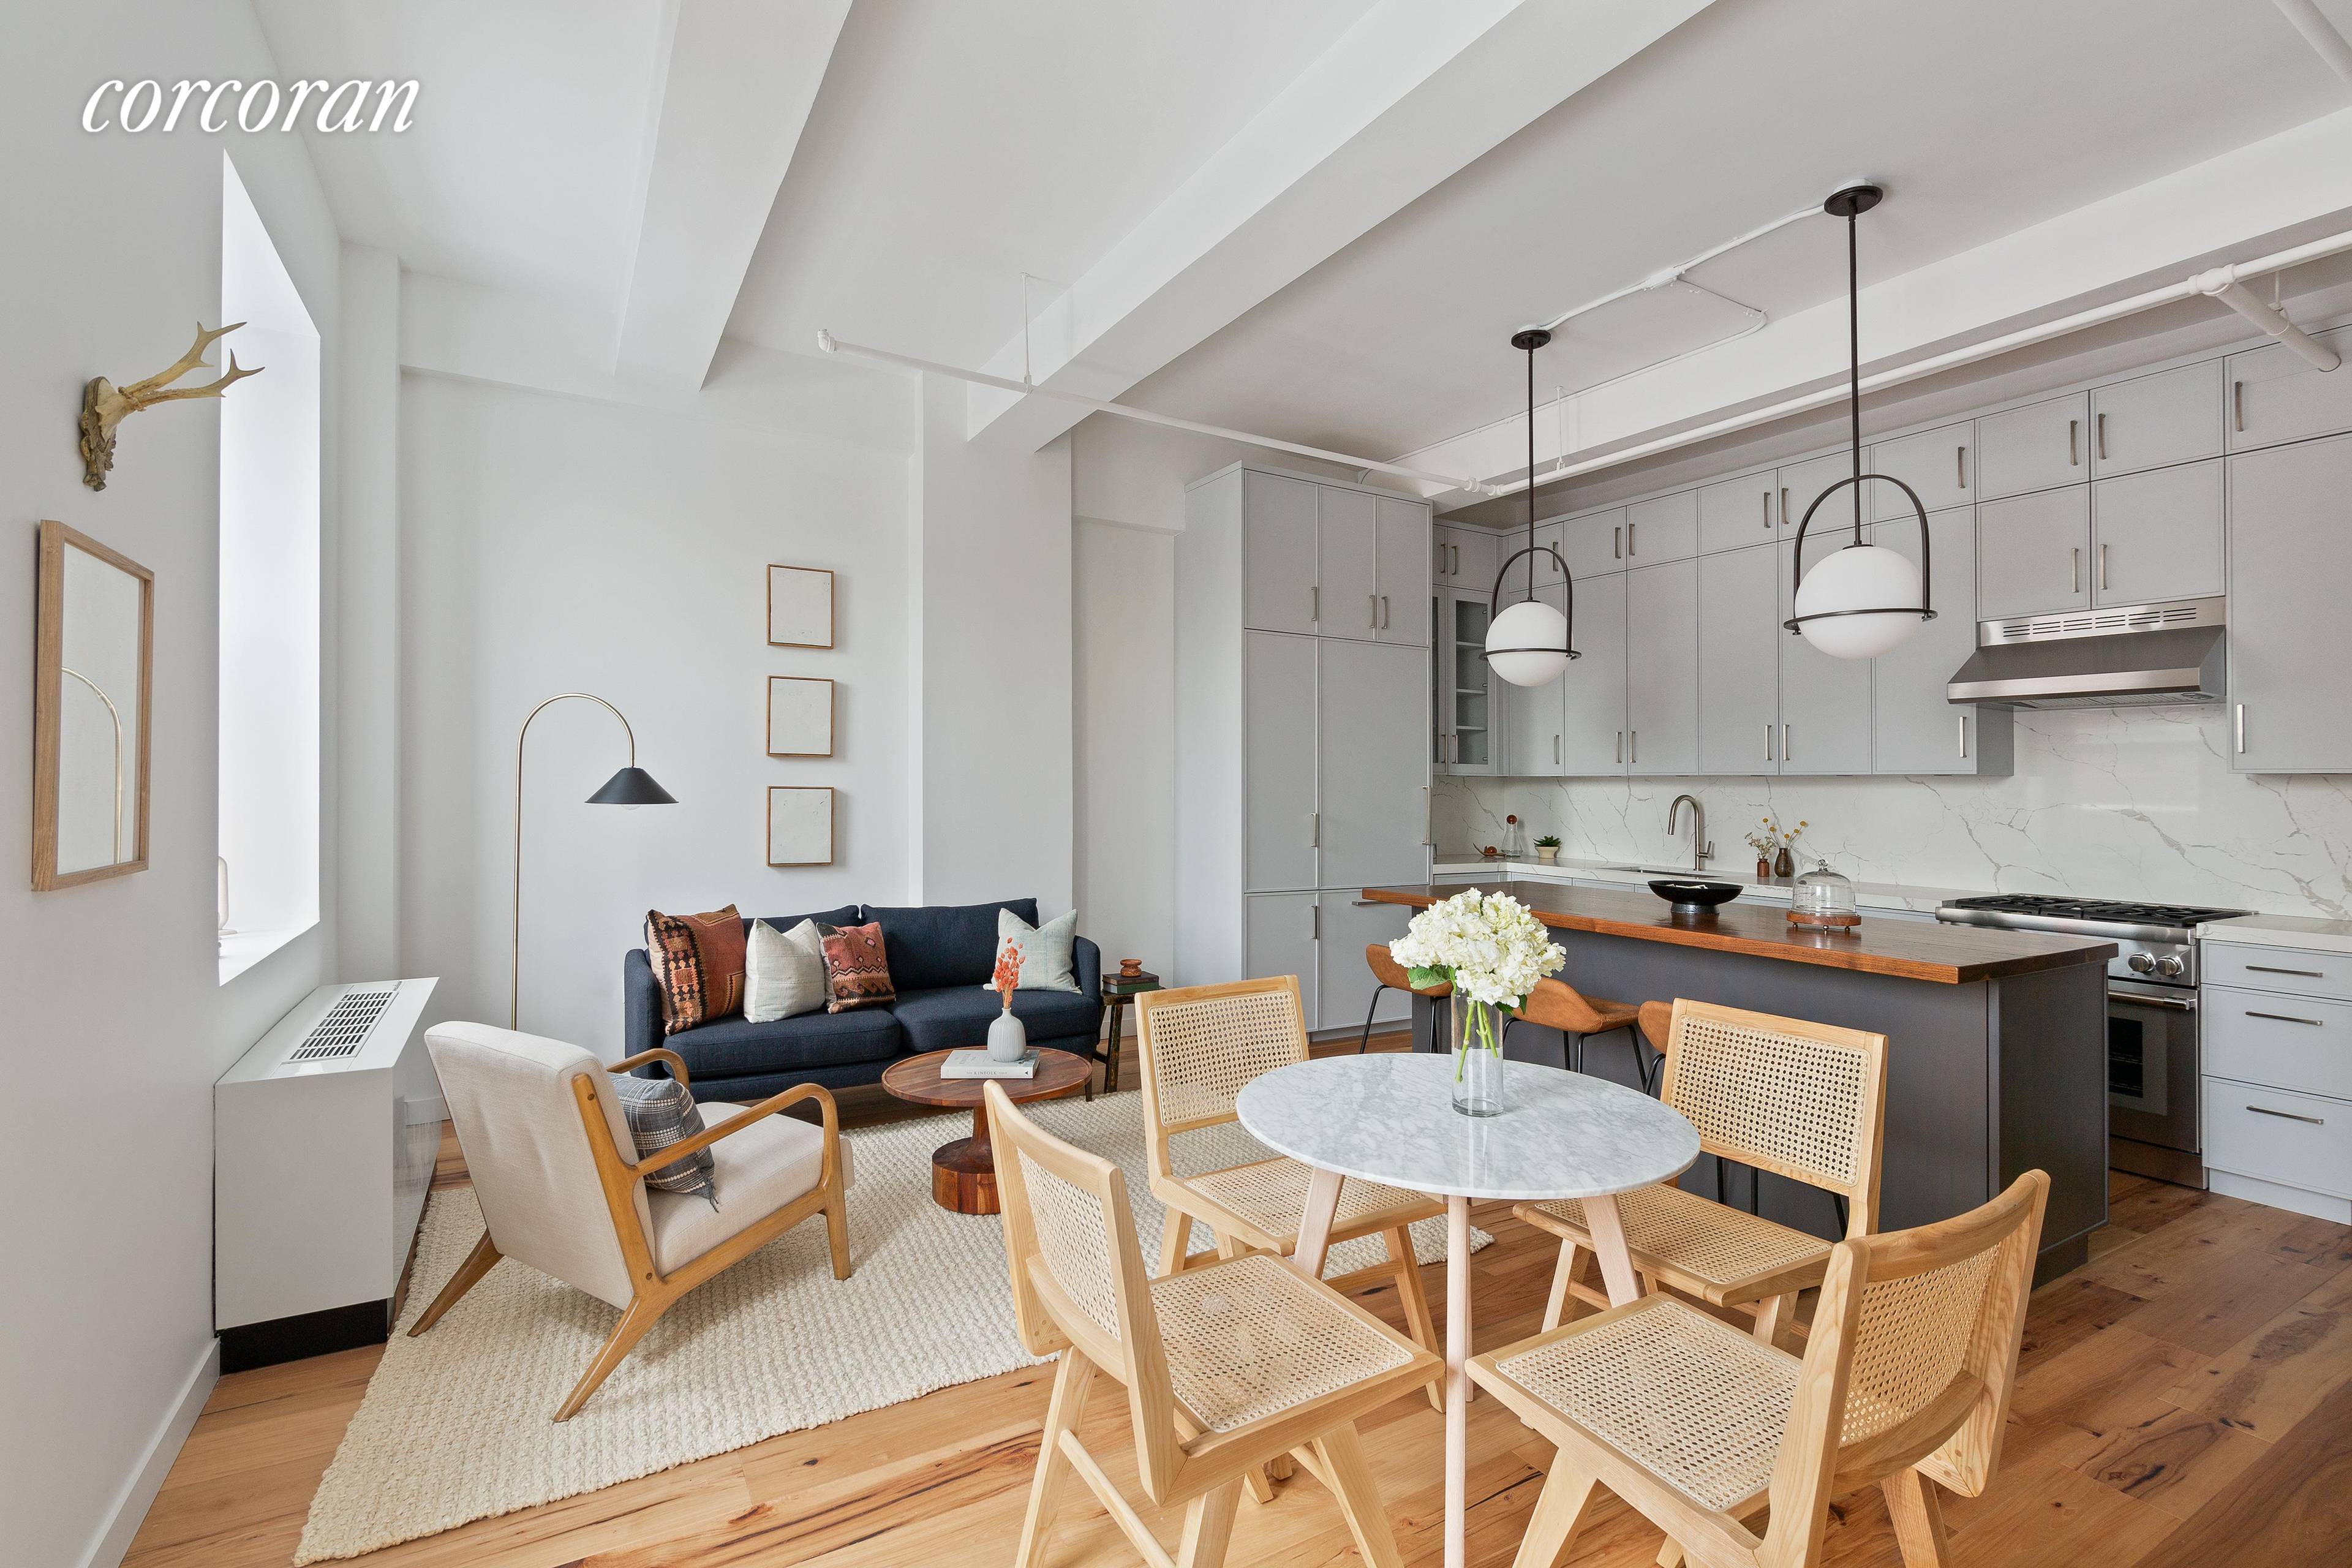 In Downtown Brooklyn's most iconic condominiums, this high floor two bedroom, two bathroom has spectacular views and a sizable terrace running the full width of the main living space.